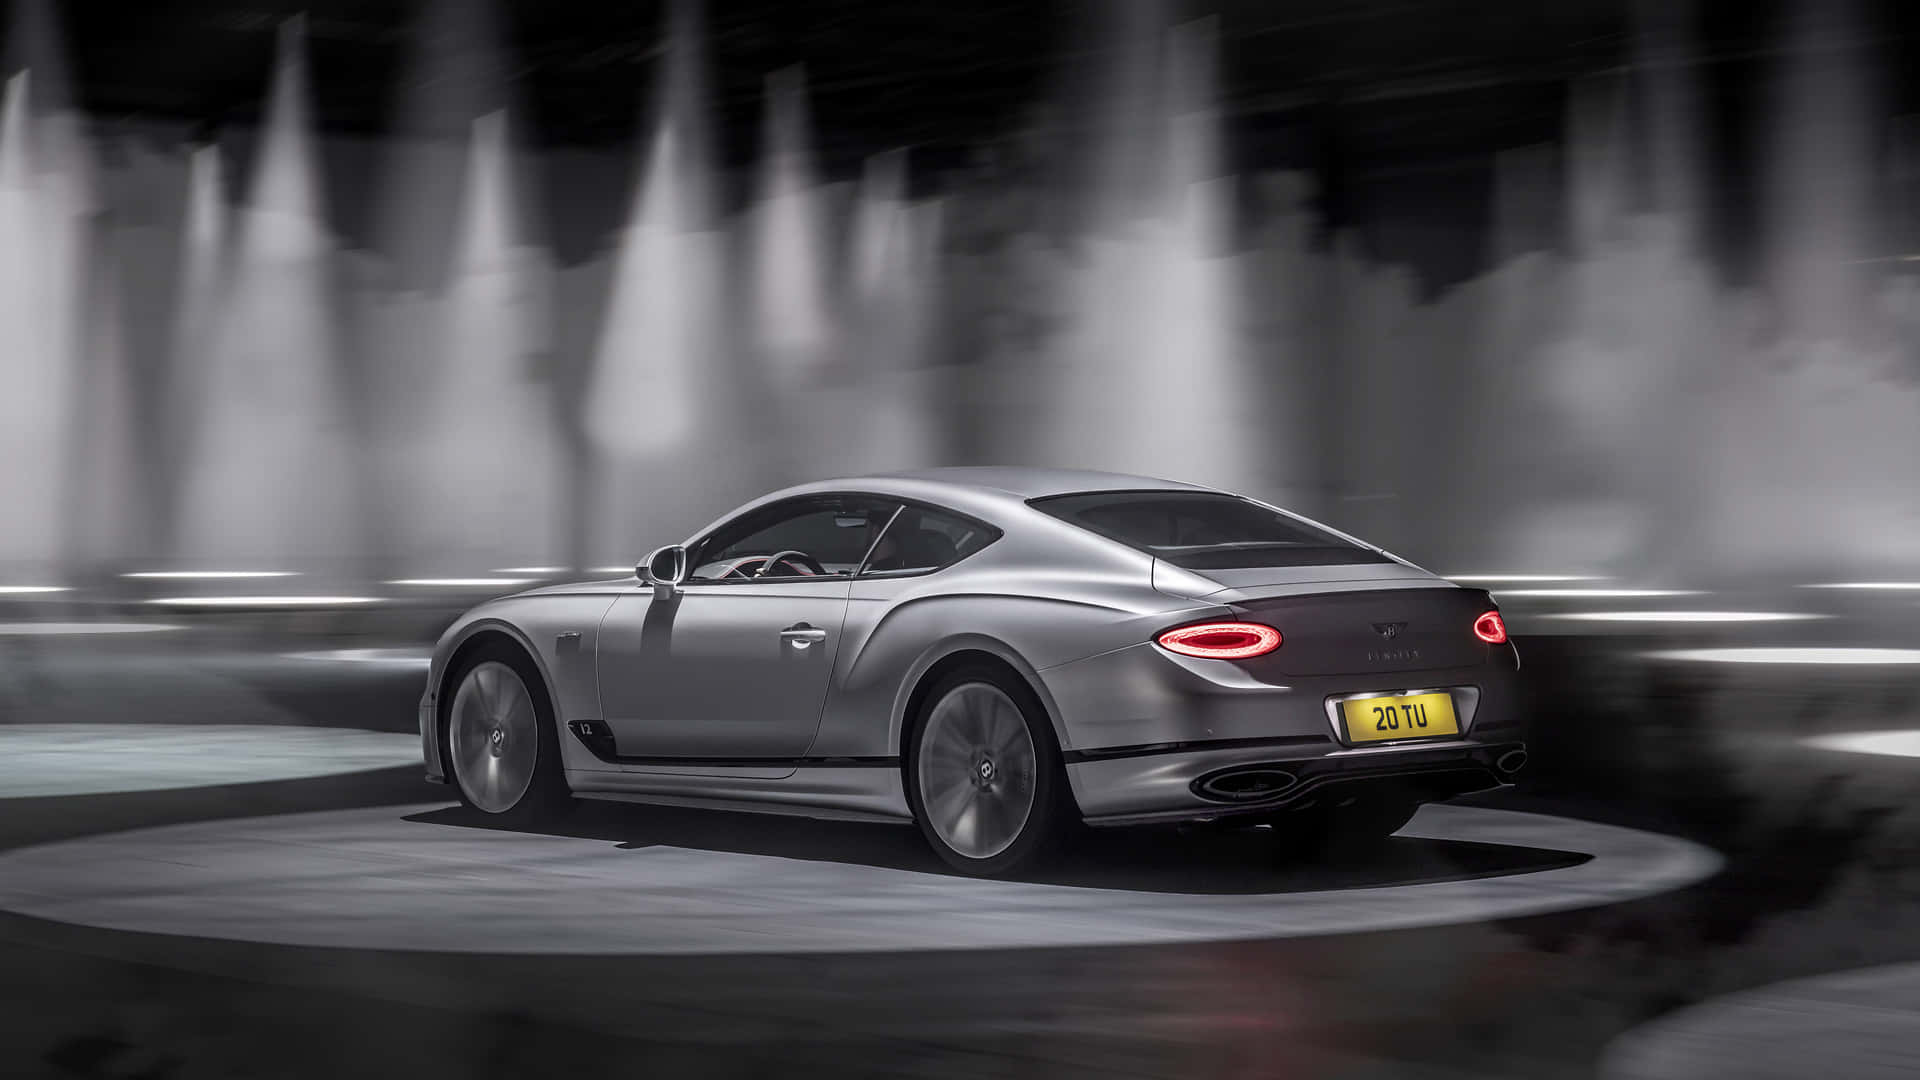 Breathtaking Bentley Continental GT Luxury Coupe on Display Wallpaper